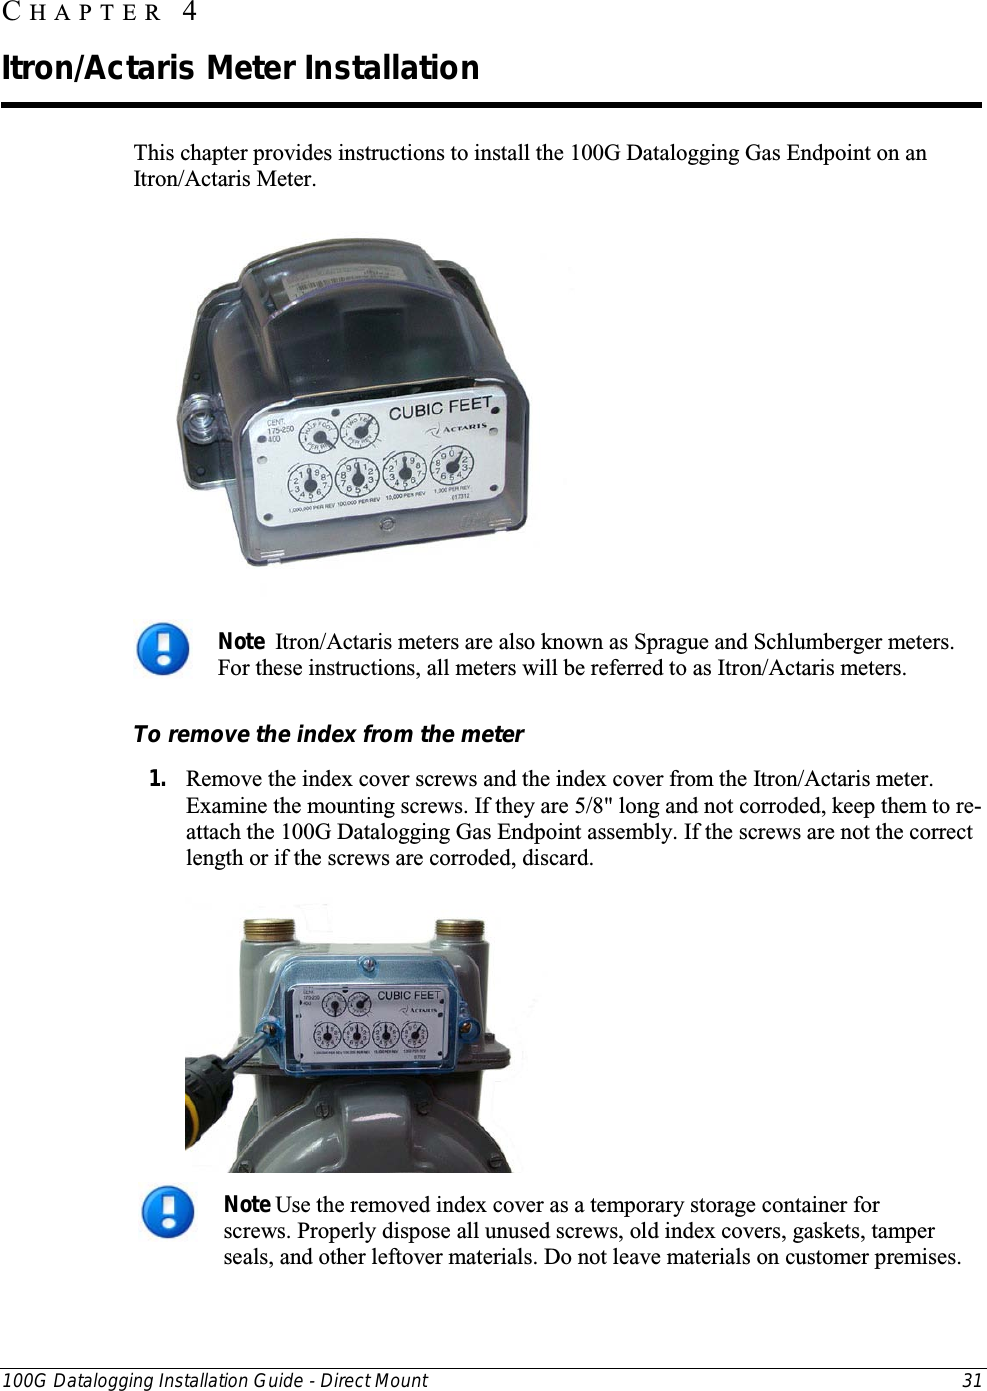  100G Datalogging Installation Guide - Direct Mount 31  This chapter provides instructions to install the 100G Datalogging Gas Endpoint on an Itron/Actaris Meter.   Note  Itron/Actaris meters are also known as Sprague and Schlumberger meters. For these instructions, all meters will be referred to as Itron/Actaris meters.  To remove the index from the meter 1. Remove the index cover screws and the index cover from the Itron/Actaris meter. Examine the mounting screws. If they are 5/8&quot; long and not corroded, keep them to re-attach the 100G Datalogging Gas Endpoint assembly. If the screws are not the correct length or if the screws are corroded, discard.    Note Use the removed index cover as a temporary storage container for screws. Properly dispose all unused screws, old index covers, gaskets, tamper seals, and other leftover materials. Do not leave materials on customer premises.  CHAPTER  4  Itron/Actaris Meter Installation 